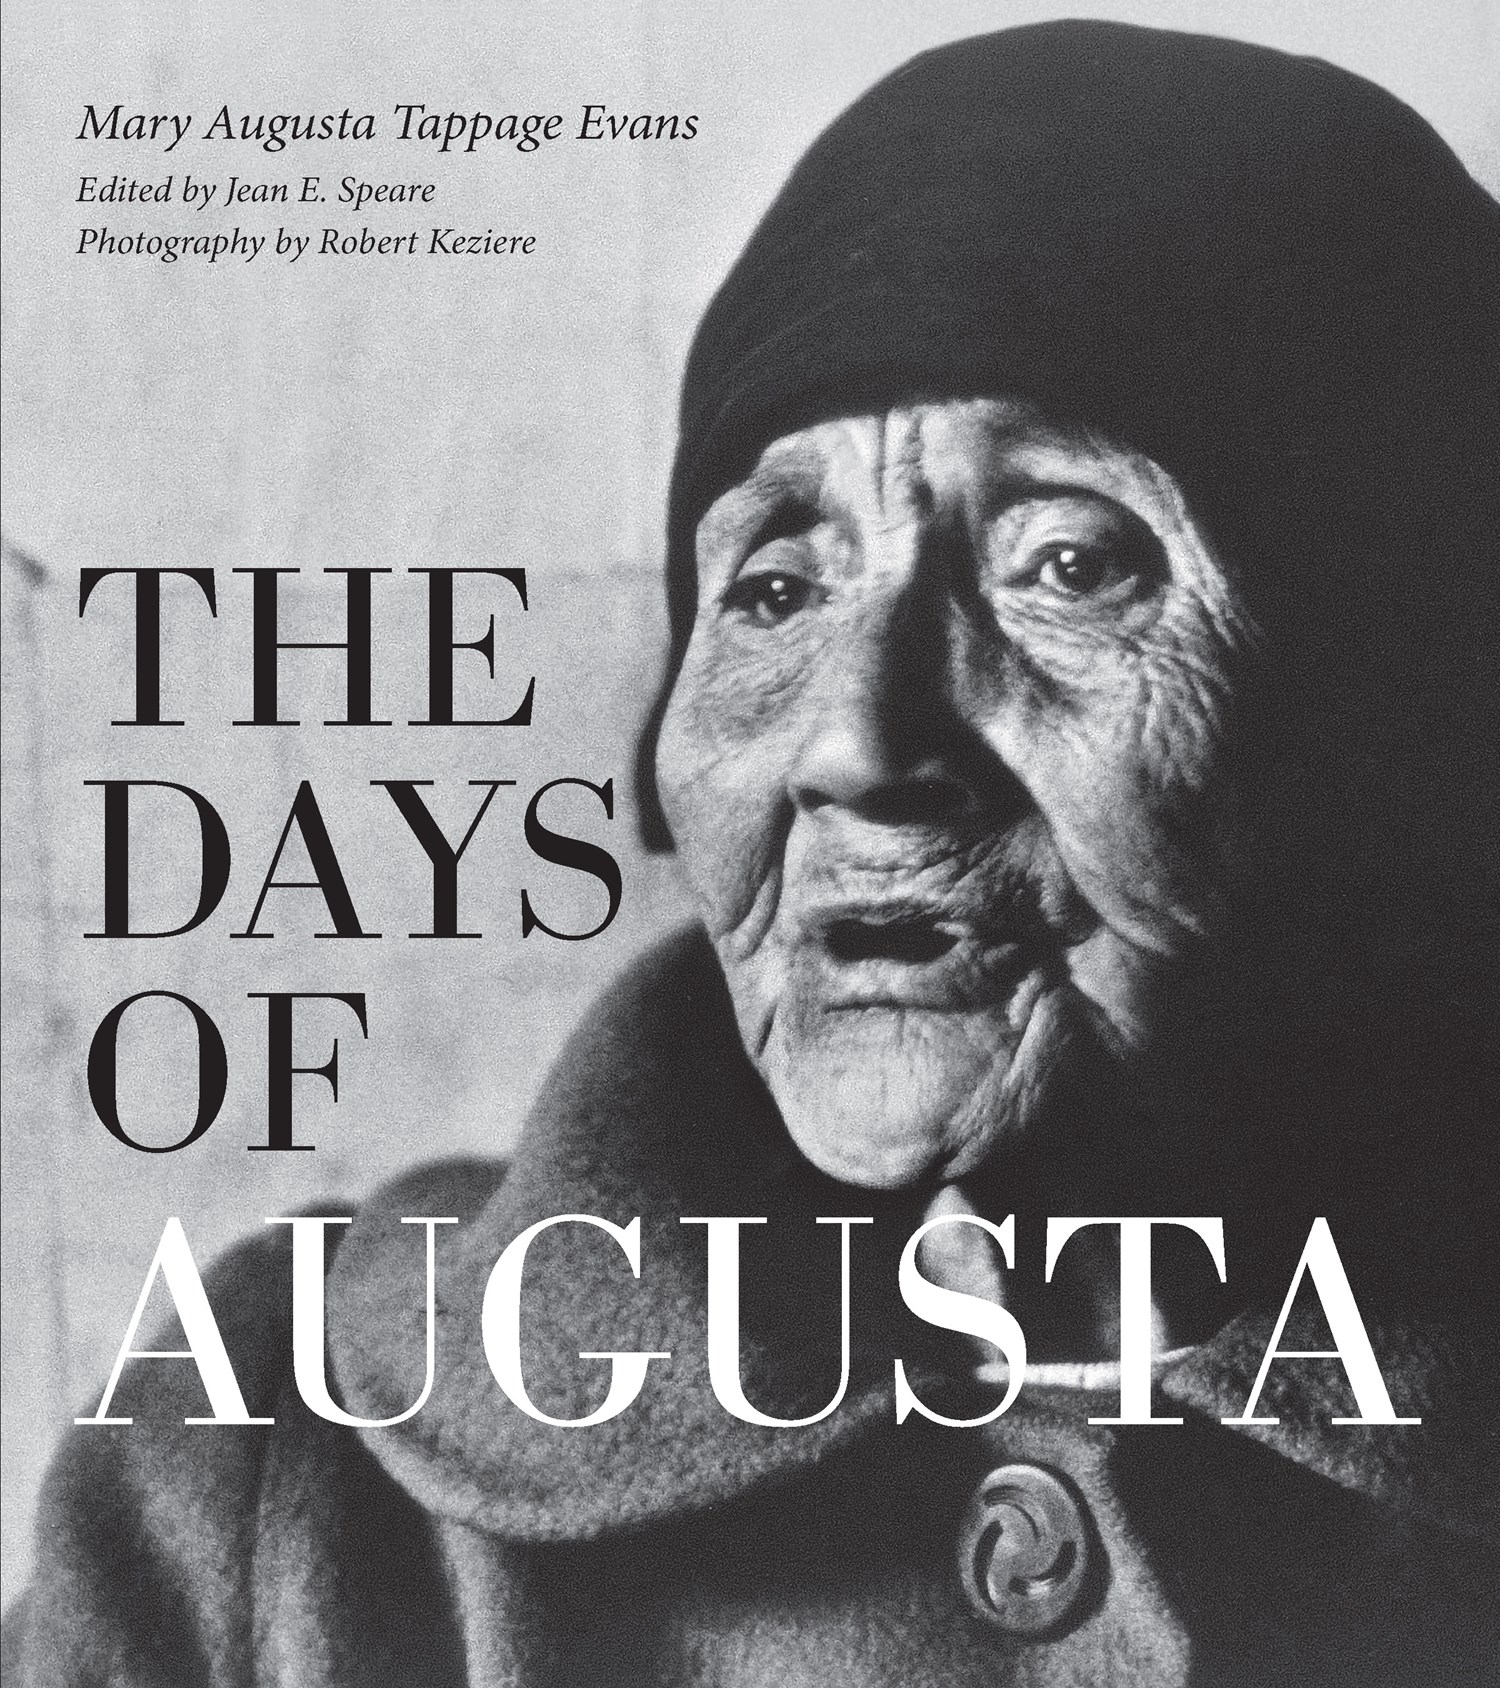 Days of Augusta, The